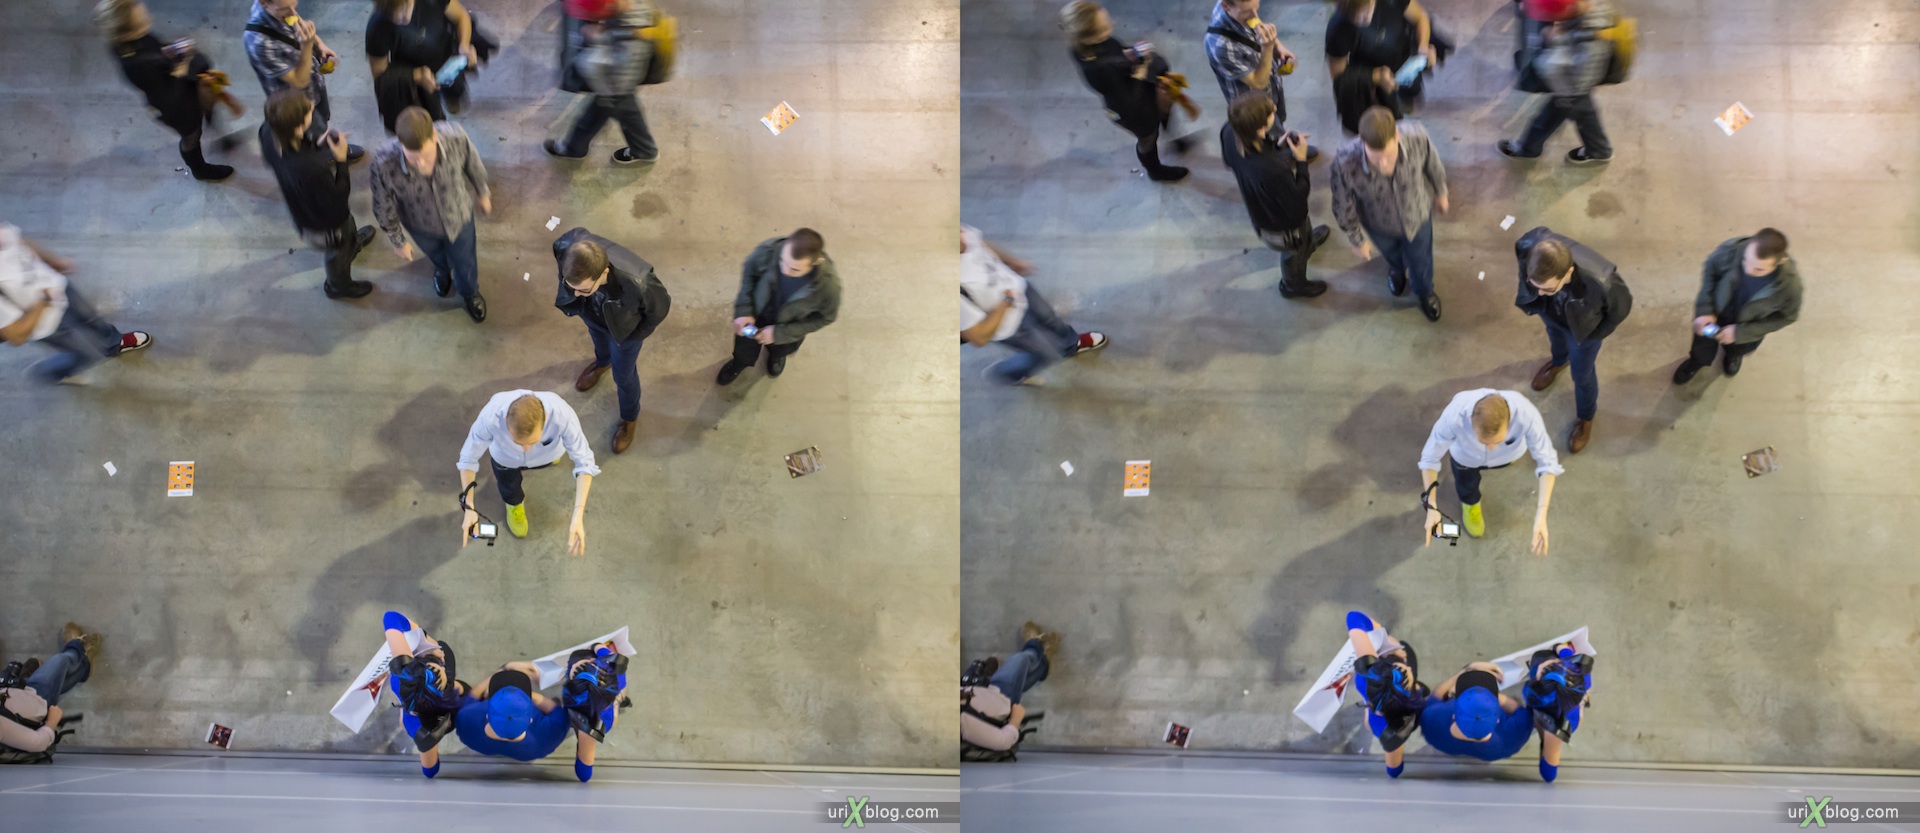 2012, Gameworld 2012 at Moscow, Crocus Expo, 3D, stereo pair, cross-eyed, crossview, cross view stereo pair